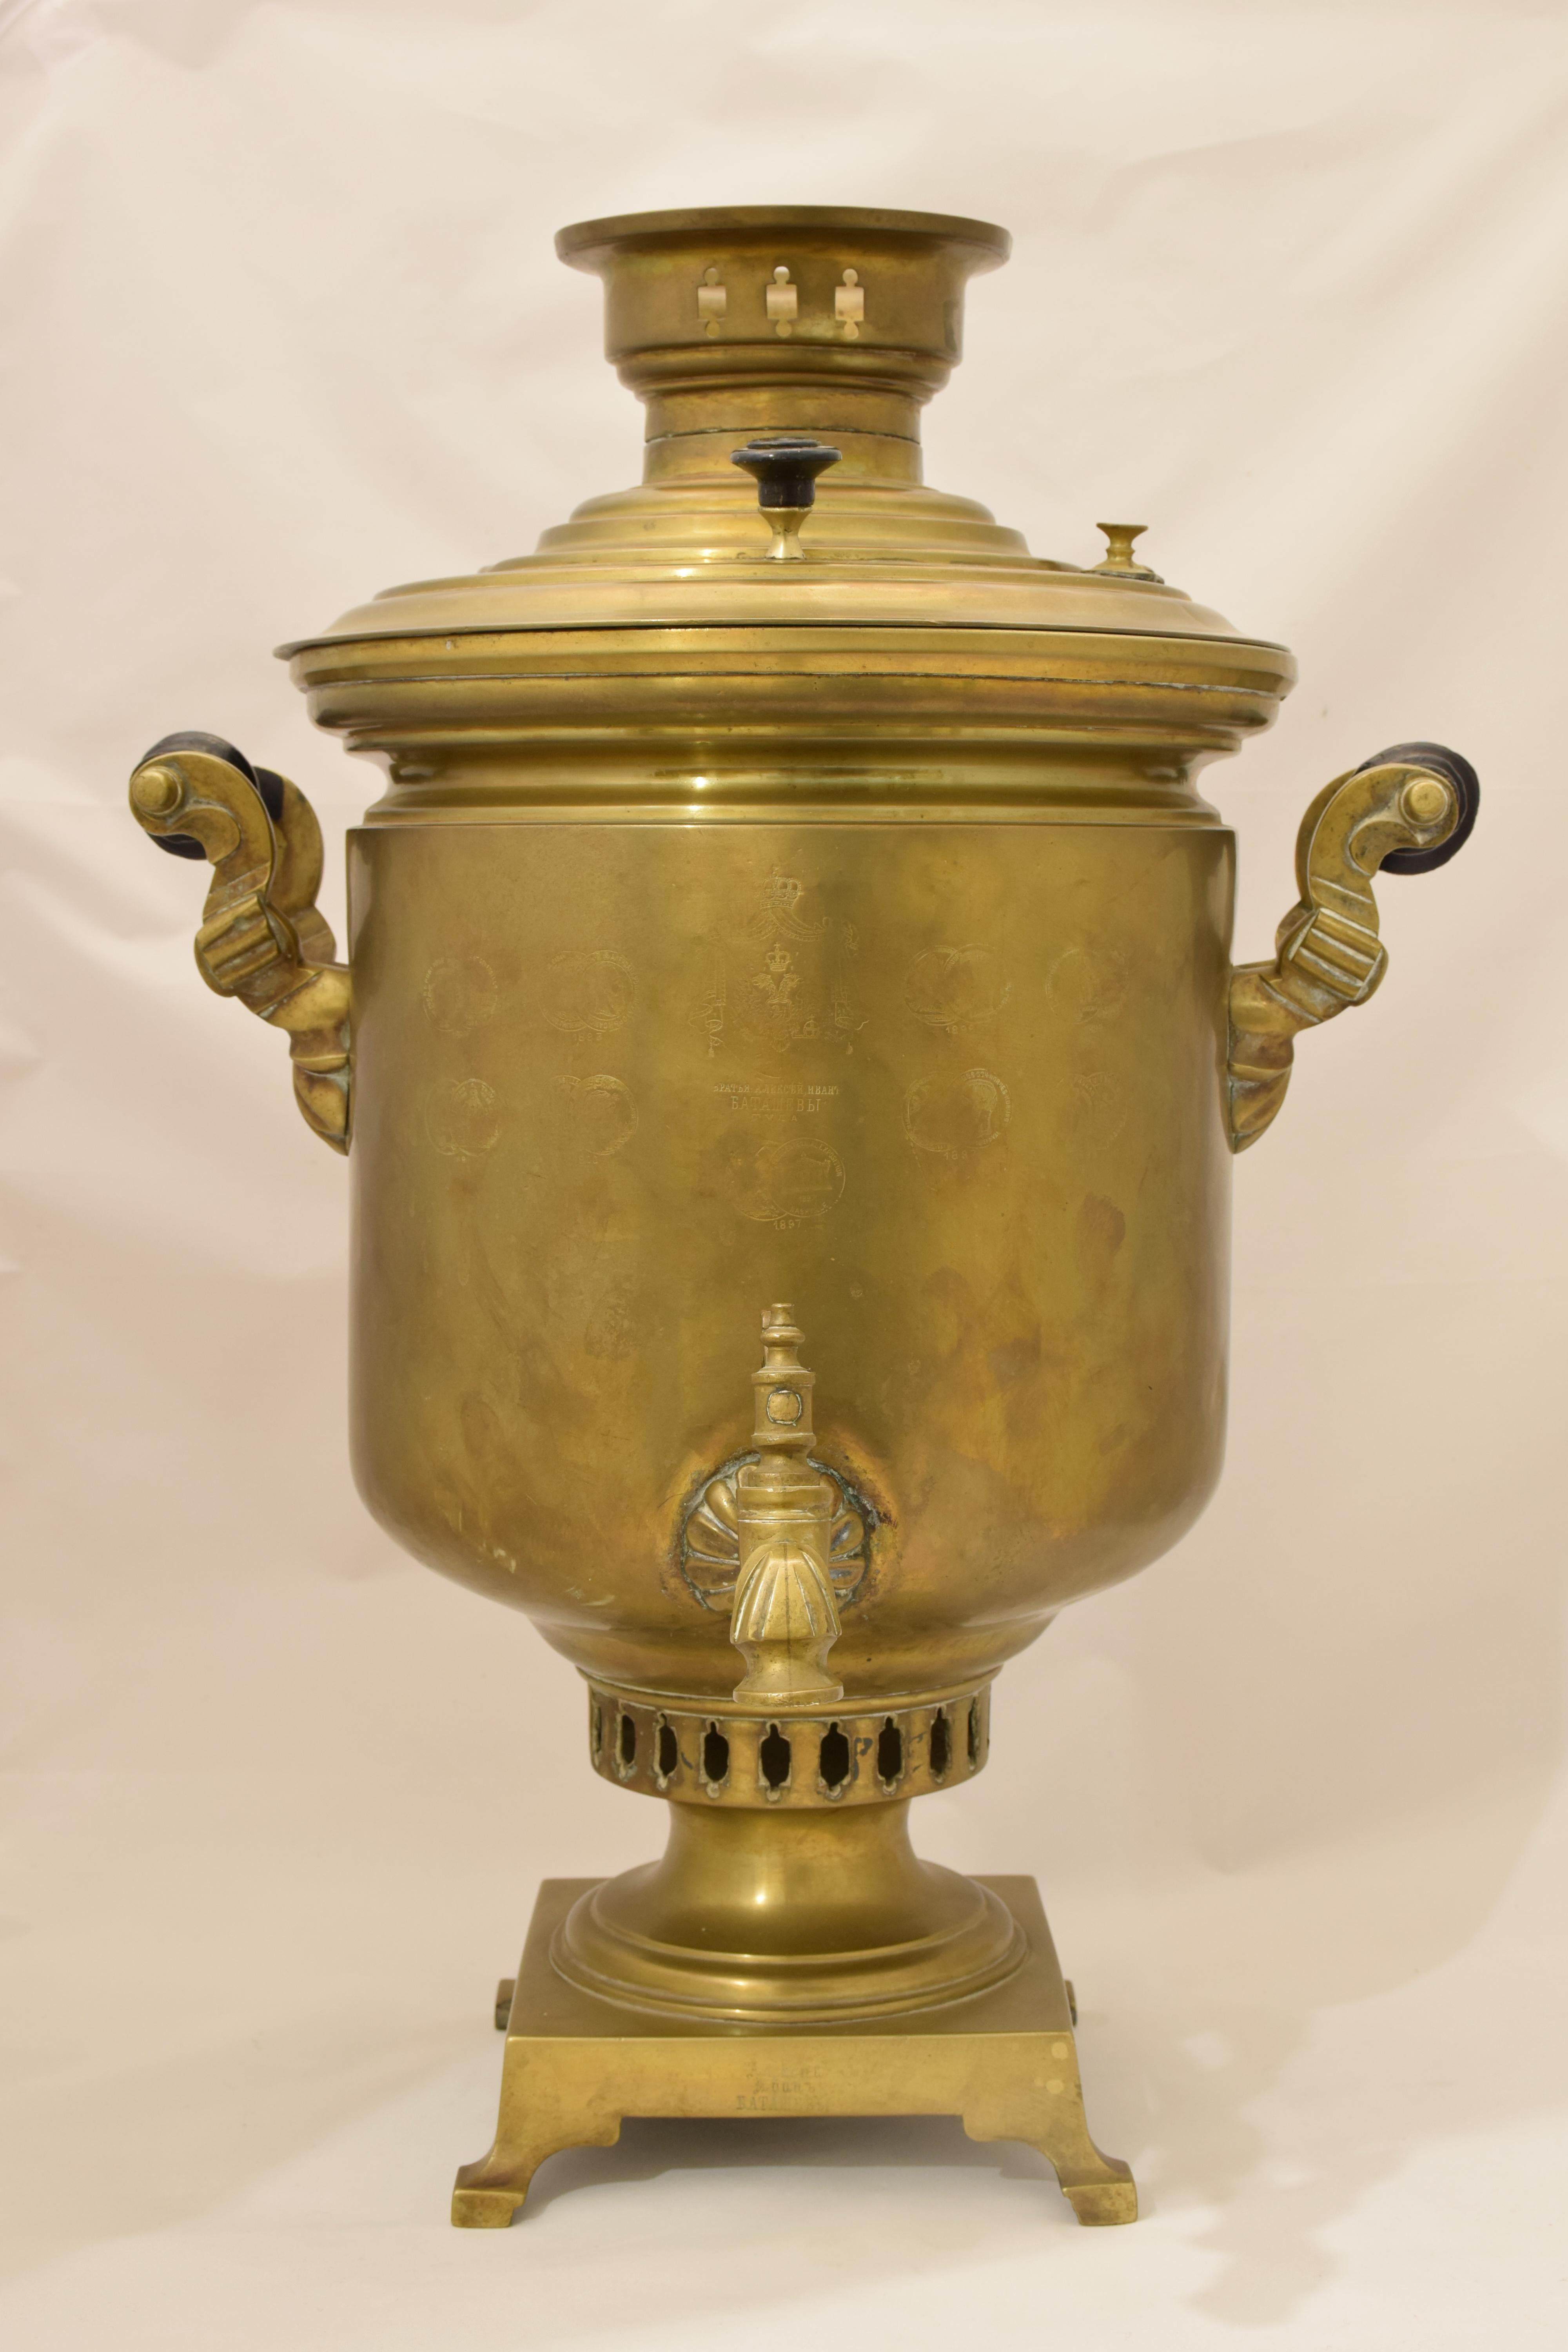 Samovar with two side handles in ebanized turned wood
Very good condition
Russia
Early twentieth century
Height cm 57 Width cm 38
Weight 6 kg circa.